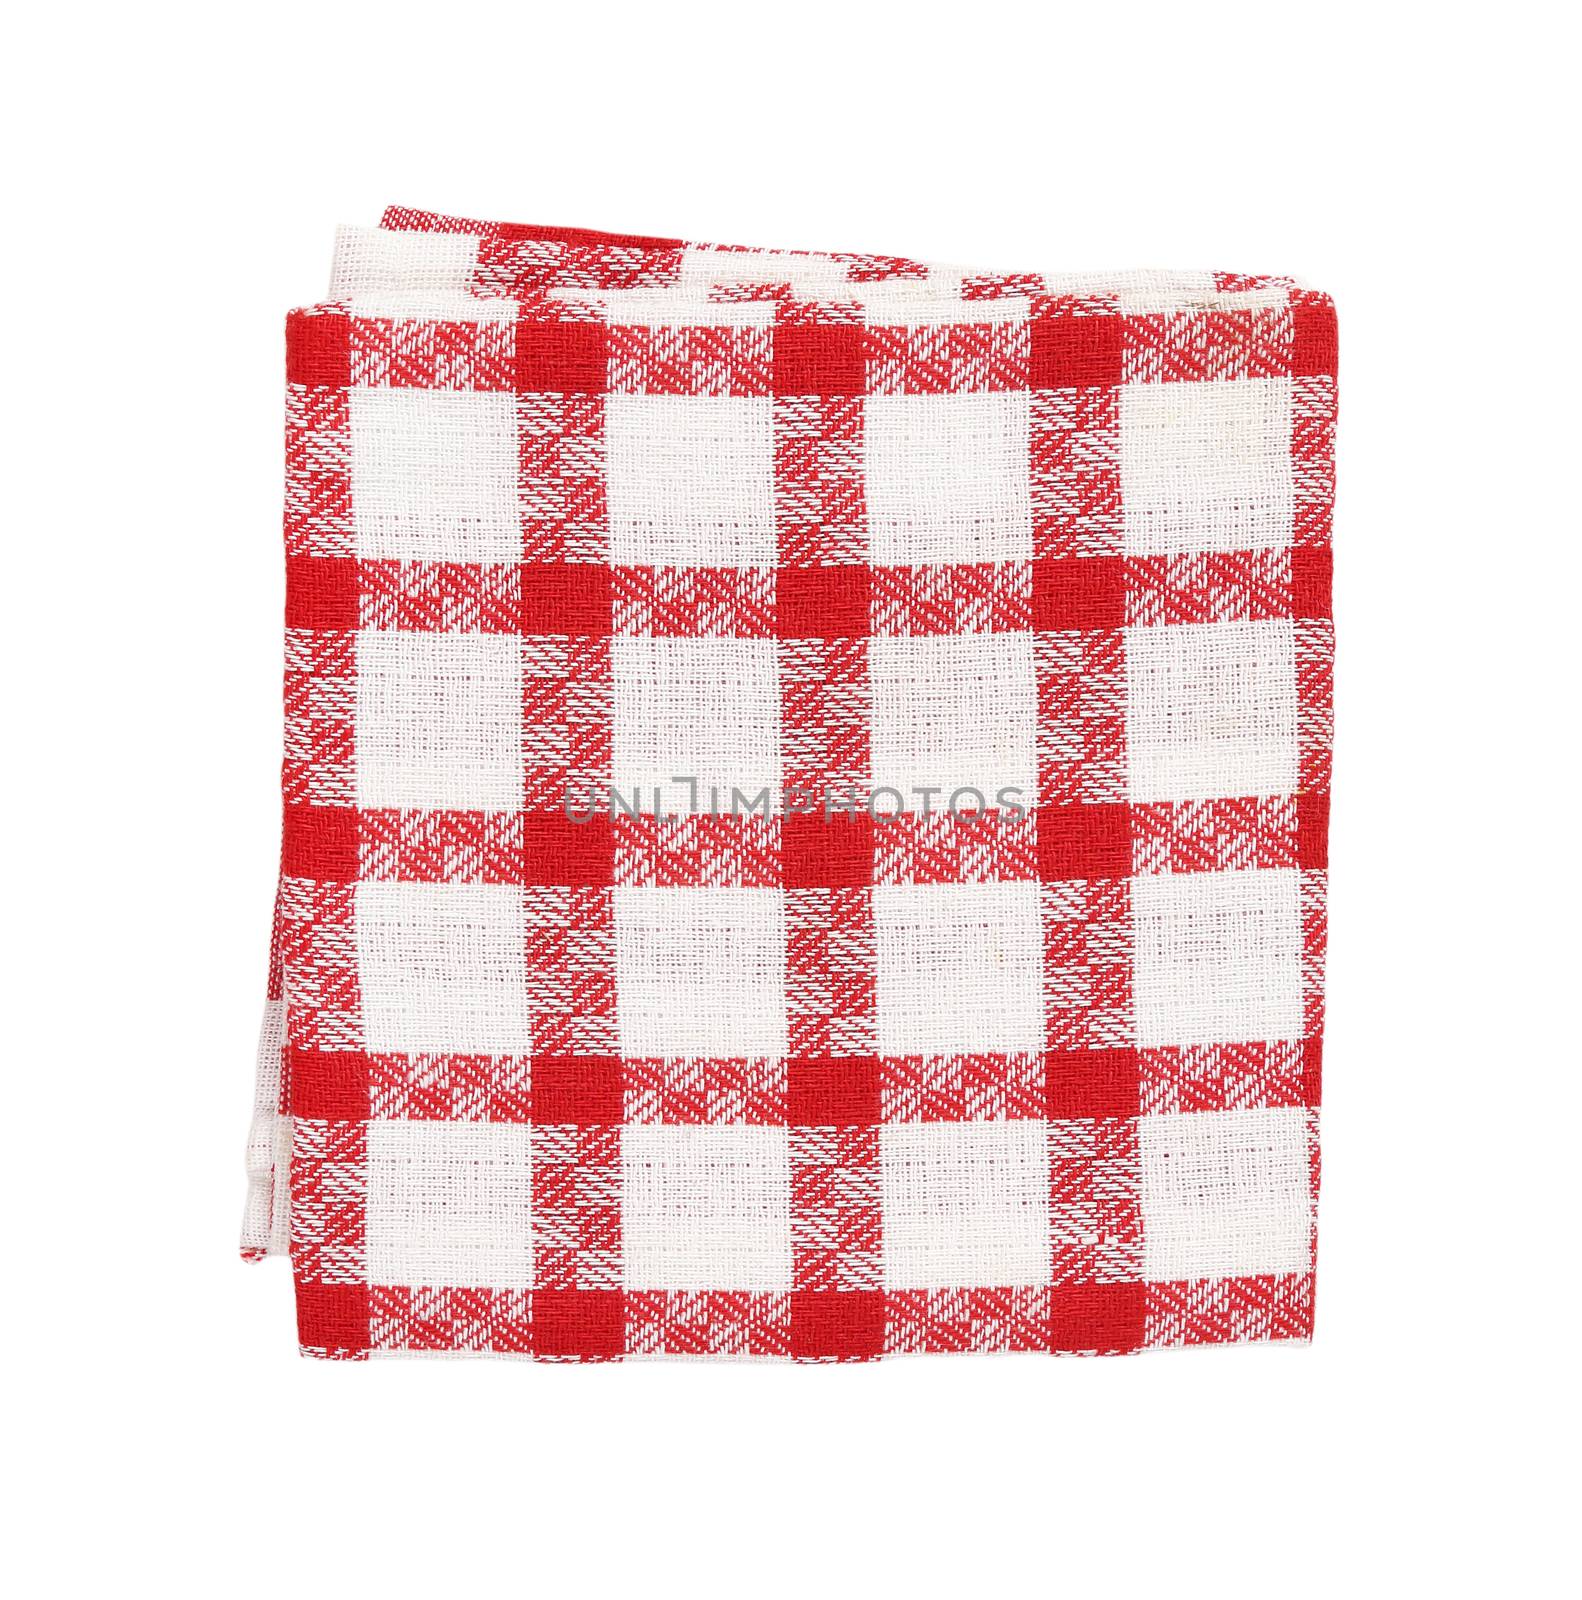 Checked red and white kitchen tea towel by Digifoodstock